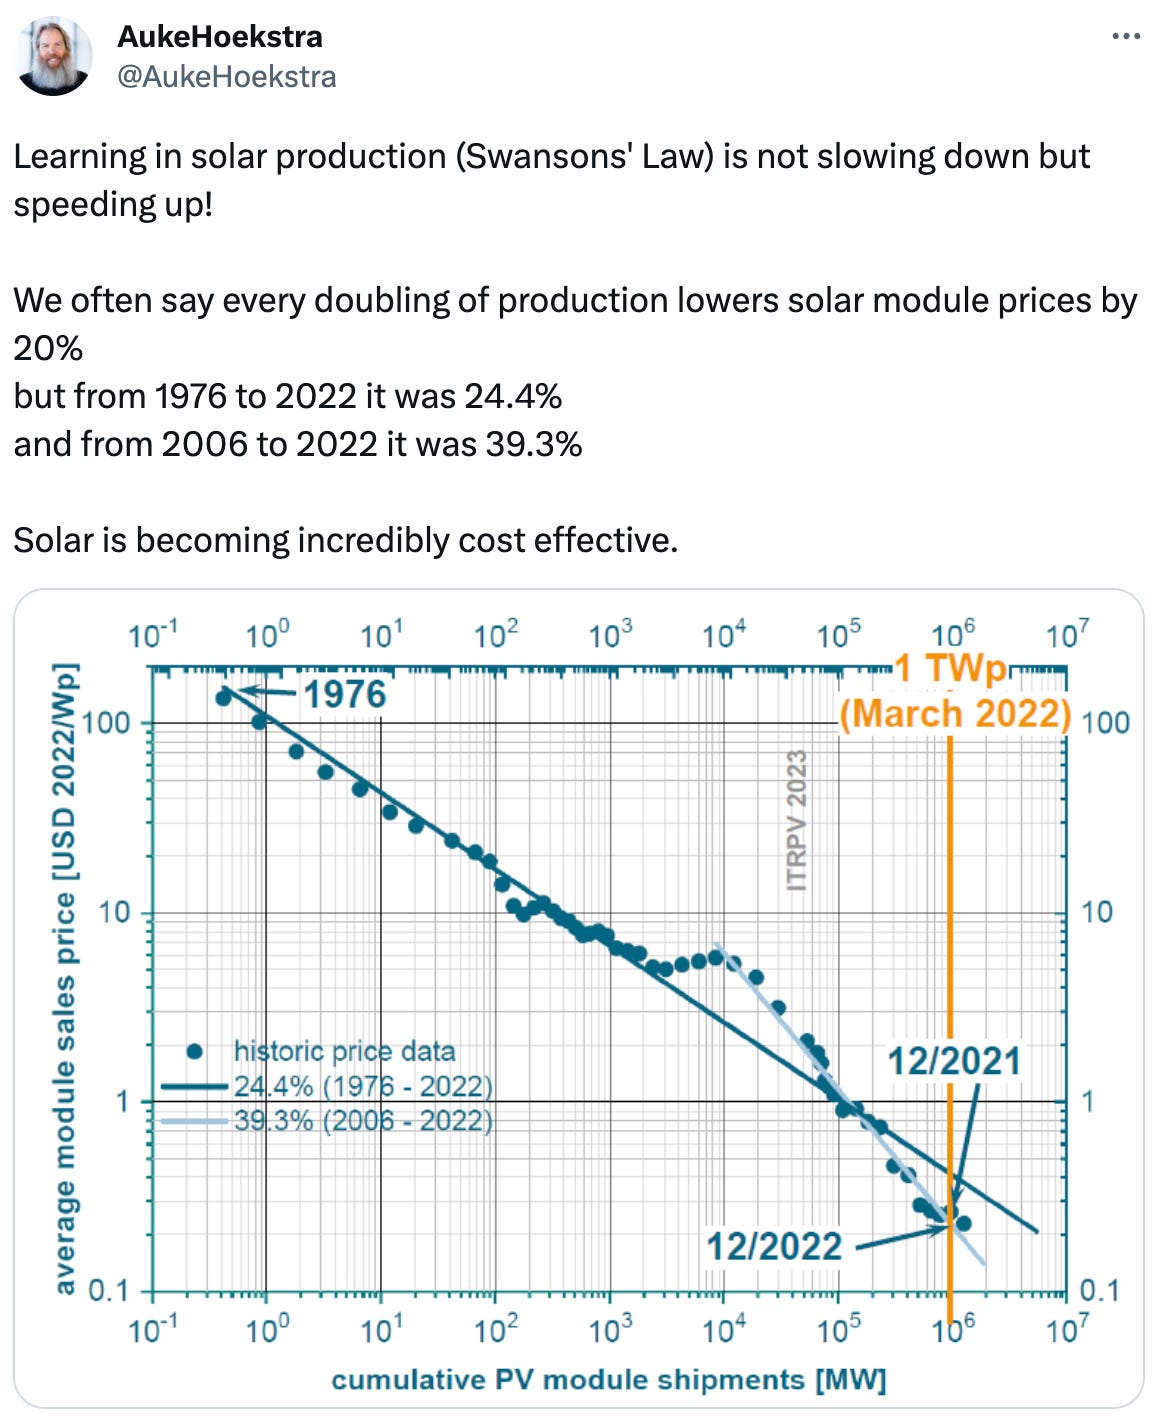  See new Tweets Conversation AukeHoekstra @AukeHoekstra · 23h A thread on PV expectations for the coming ten years: higher efficiences and lower costs due to a host of new technologies.  My take-away: the solar energy hurricane is still gaining strength.  (Based on the VDMA/ITRPV roadmap: https://vdma.org/international-technology-roadmap-photovoltaic) AukeHoekstra @AukeHoekstra Learning in solar production (Swansons' Law) is not slowing down but speeding up!  We often say every doubling of production lowers solar module prices by 20% but from 1976 to 2022 it was 24.4% and from 2006 to 2022 it was 39.3%  Solar is becoming incredibly cost effective.